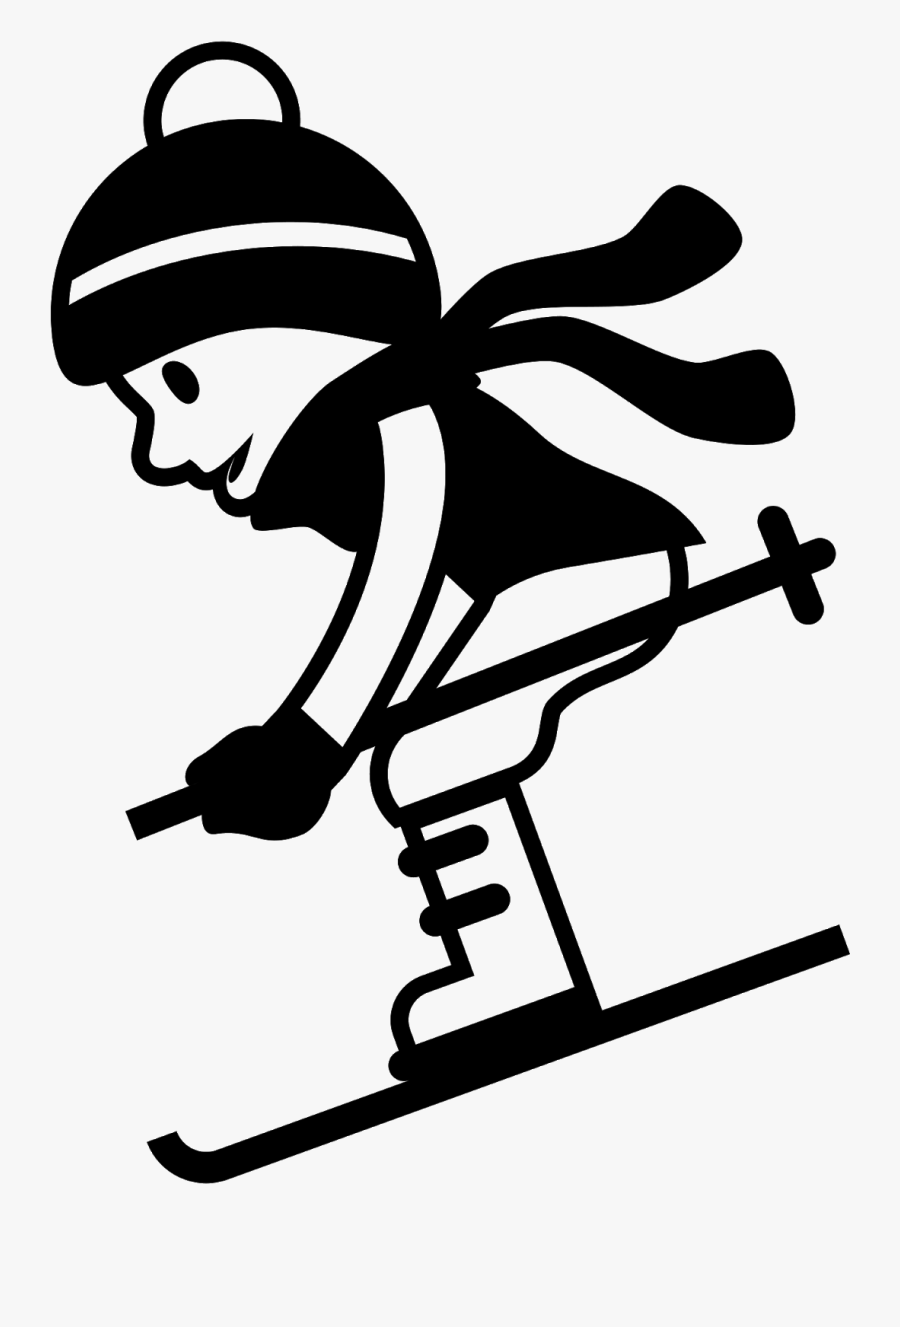 Ski Clipart Freestyle Skiing - Clipart Cartoon Of Skiing, Transparent Clipart